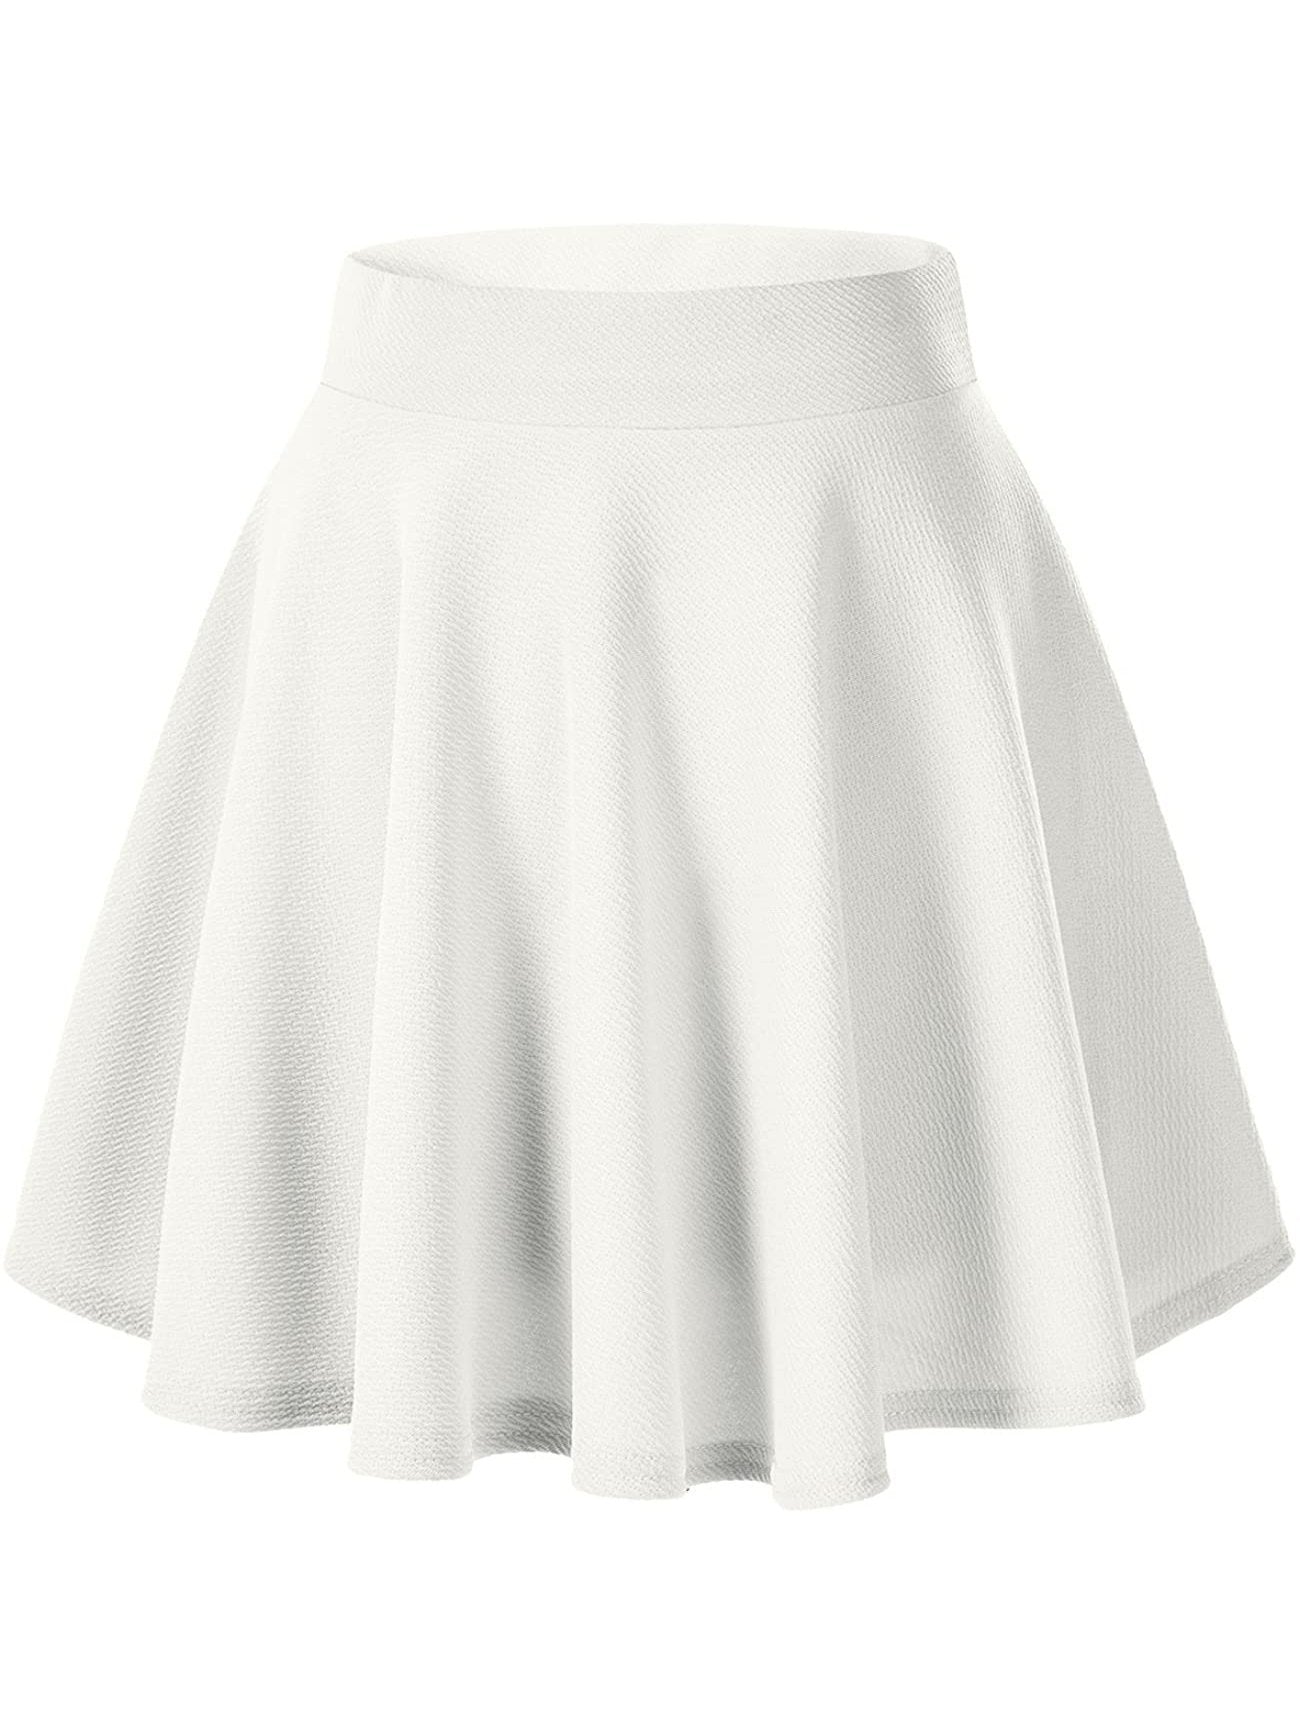 Women's Basic Versatile Stretchy Flared Casual Mini Skater Skirt - Skirts - INS | Online Fashion Free Shipping Clothing, Dresses, Tops, Shoes - 15/03/2021 - 2XL - Autumn